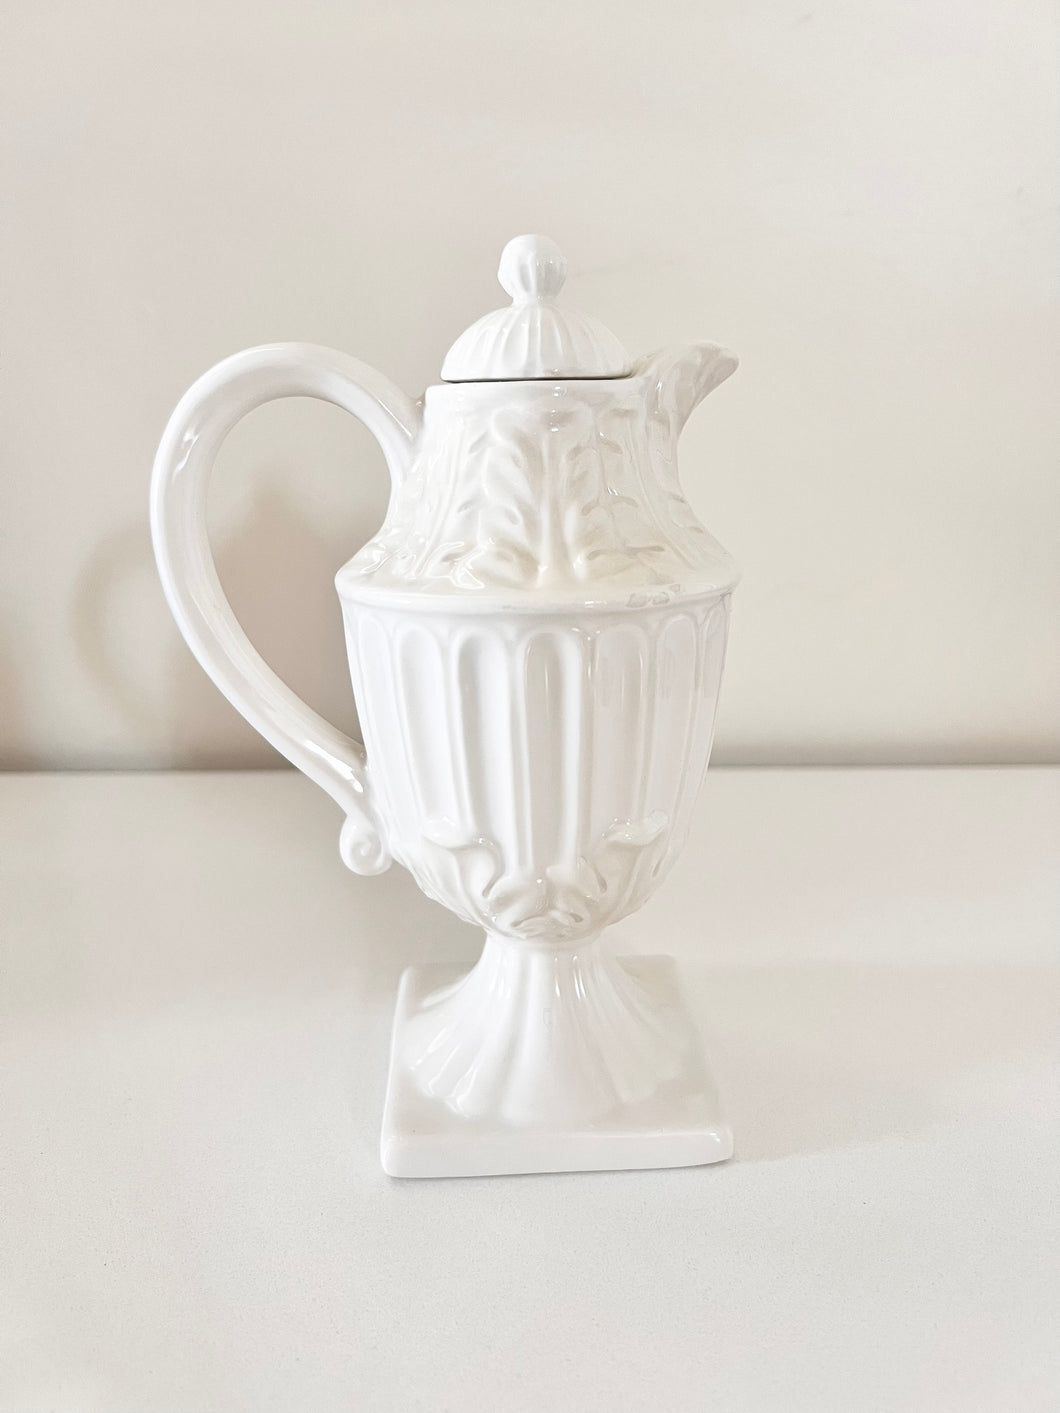 19 • Small white ceramic lidded pitcher